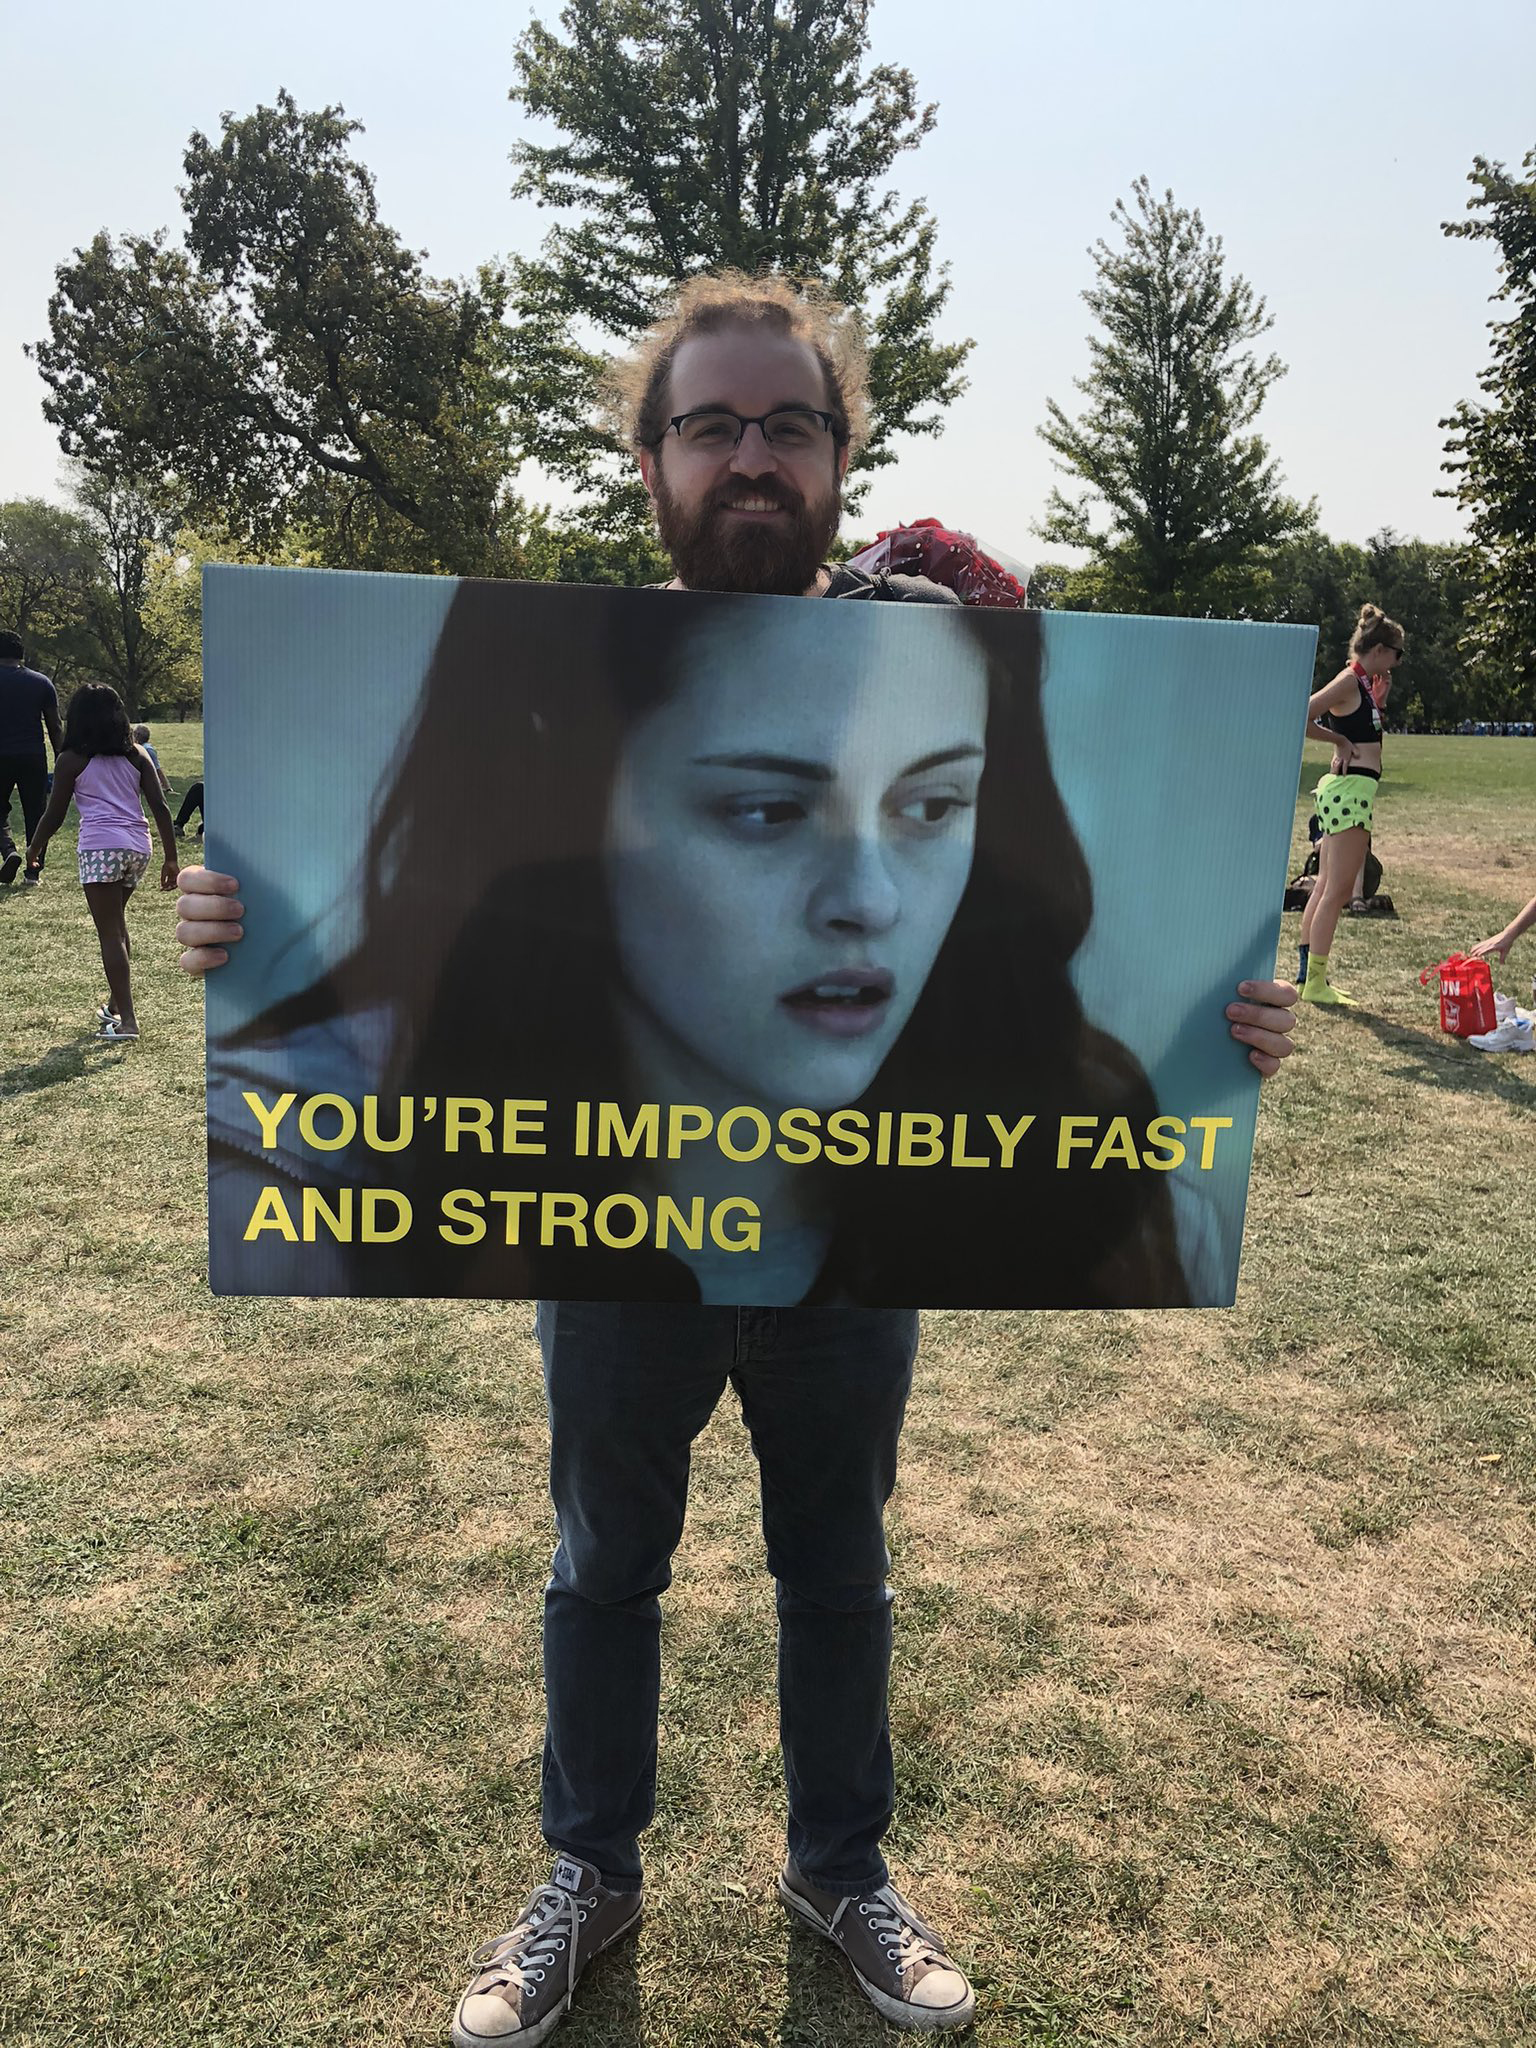 Ben once went viral for holding a Twilight sign at his wife's race